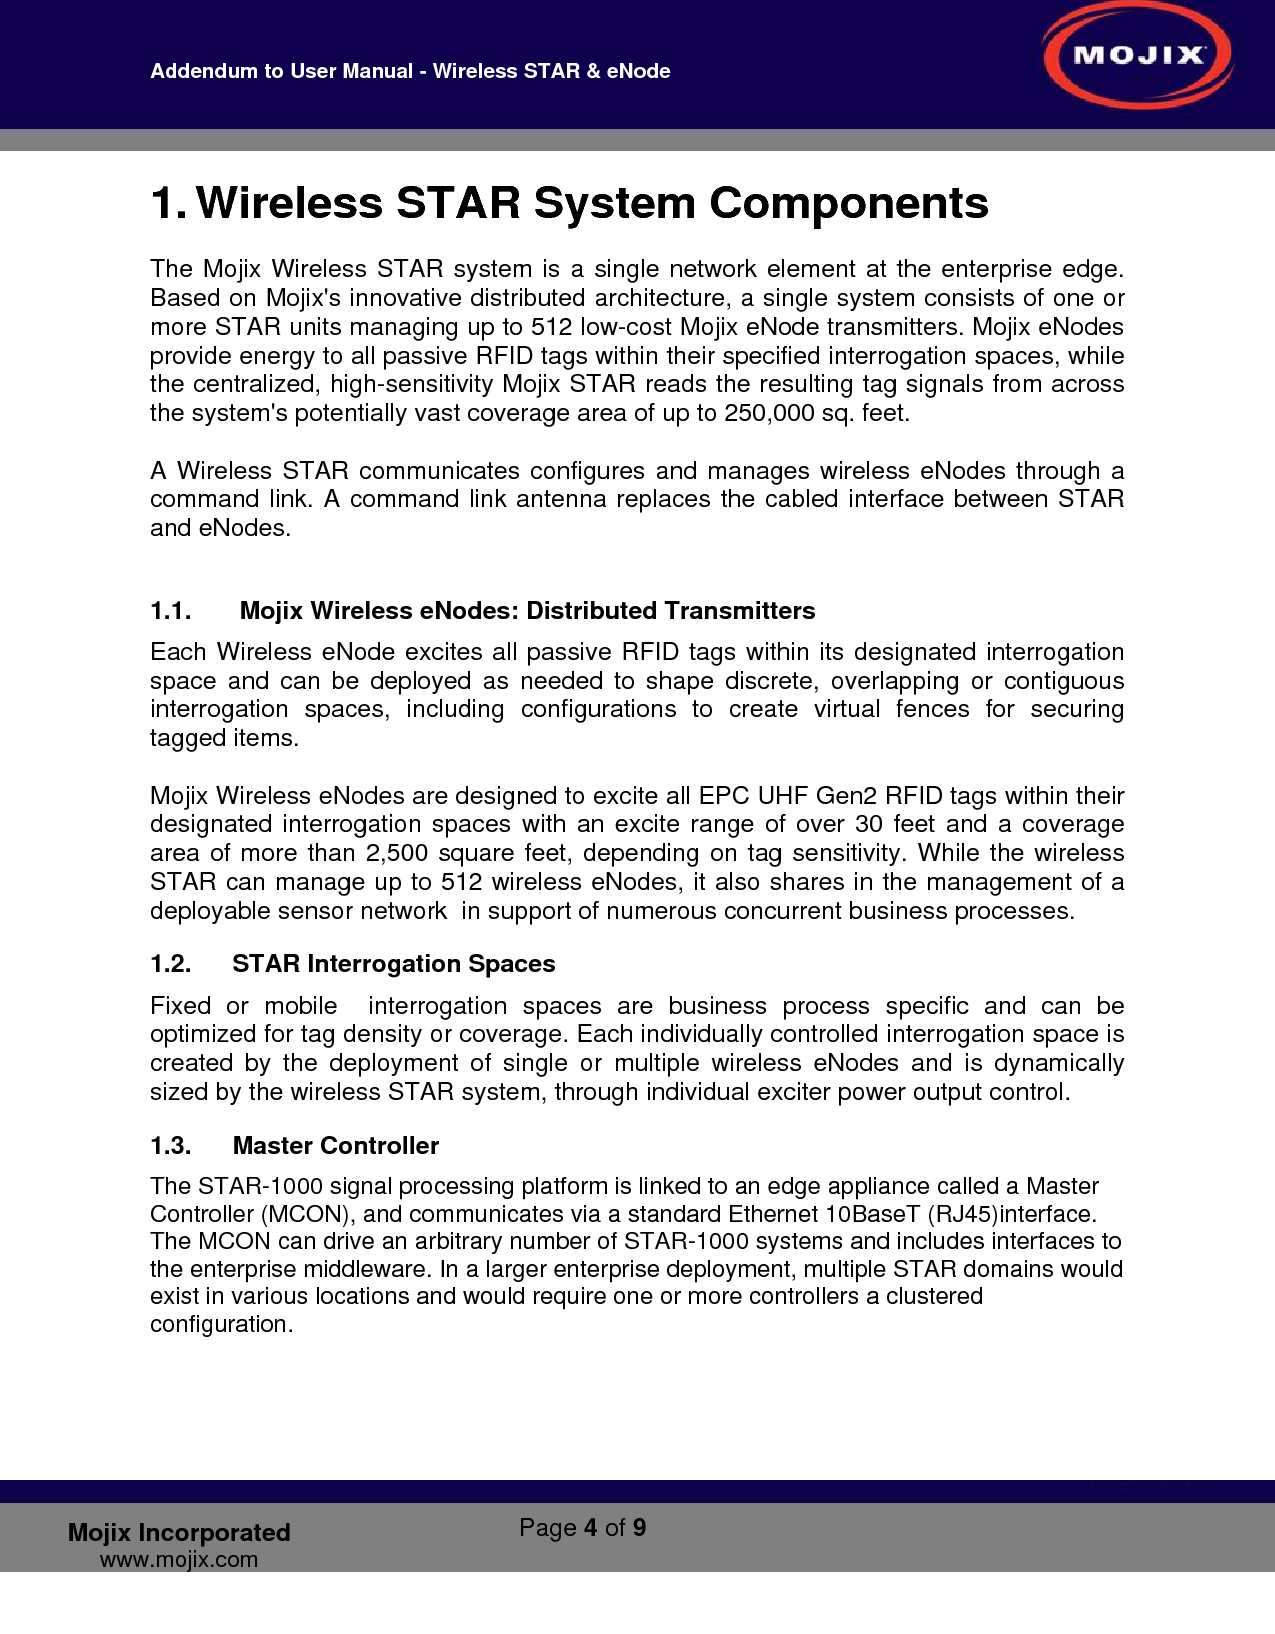 Addendum to User Manual - Wireless STAR &amp; eNode        Page 4 of 9   Mojix Incorporated www.mojix.com 1. Wireless STAR System Components The Mojix Wireless STAR system is a single network element at the enterprise edge. Based on Mojix&apos;s innovative distributed architecture, a single system consists of one or more STAR units managing up to 512 low-cost Mojix eNode transmitters. Mojix eNodes provide energy to all passive RFID tags within their specified interrogation spaces, while the centralized, high-sensitivity Mojix STAR reads the resulting tag signals from across the system&apos;s potentially vast coverage area of up to 250,000 sq. feet.   A Wireless STAR communicates configures and manages wireless eNodes through a command link. A command link antenna replaces the cabled interface between STAR and eNodes.  1.1.   Mojix Wireless eNodes: Distributed Transmitters  Each Wireless eNode excites all passive RFID tags within its designated interrogation space and can be deployed as needed to shape discrete, overlapping or contiguous interrogation spaces, including configurations to create virtual fences for securing tagged items.   Mojix Wireless eNodes are designed to excite all EPC UHF Gen2 RFID tags within their designated interrogation spaces with an excite range of over 30 feet and a coverage area of more than 2,500 square feet, depending on tag sensitivity. While the wireless STAR can manage up to 512 wireless eNodes, it also shares in the management of a deployable sensor network  in support of numerous concurrent business processes. 1.2. STAR Interrogation Spaces Fixed or mobile  interrogation spaces are business process specific and can be optimized for tag density or coverage. Each individually controlled interrogation space is created by the deployment of single or multiple wireless eNodes and is dynamically sized by the wireless STAR system, through individual exciter power output control.  1.3. Master Controller The STAR-1000 signal processing platform is linked to an edge appliance called a Master Controller (MCON), and communicates via a standard Ethernet 10BaseT (RJ45)interface. The MCON can drive an arbitrary number of STAR-1000 systems and includes interfaces to the enterprise middleware. In a larger enterprise deployment, multiple STAR domains would exist in various locations and would require one or more controllers a clustered configuration.   